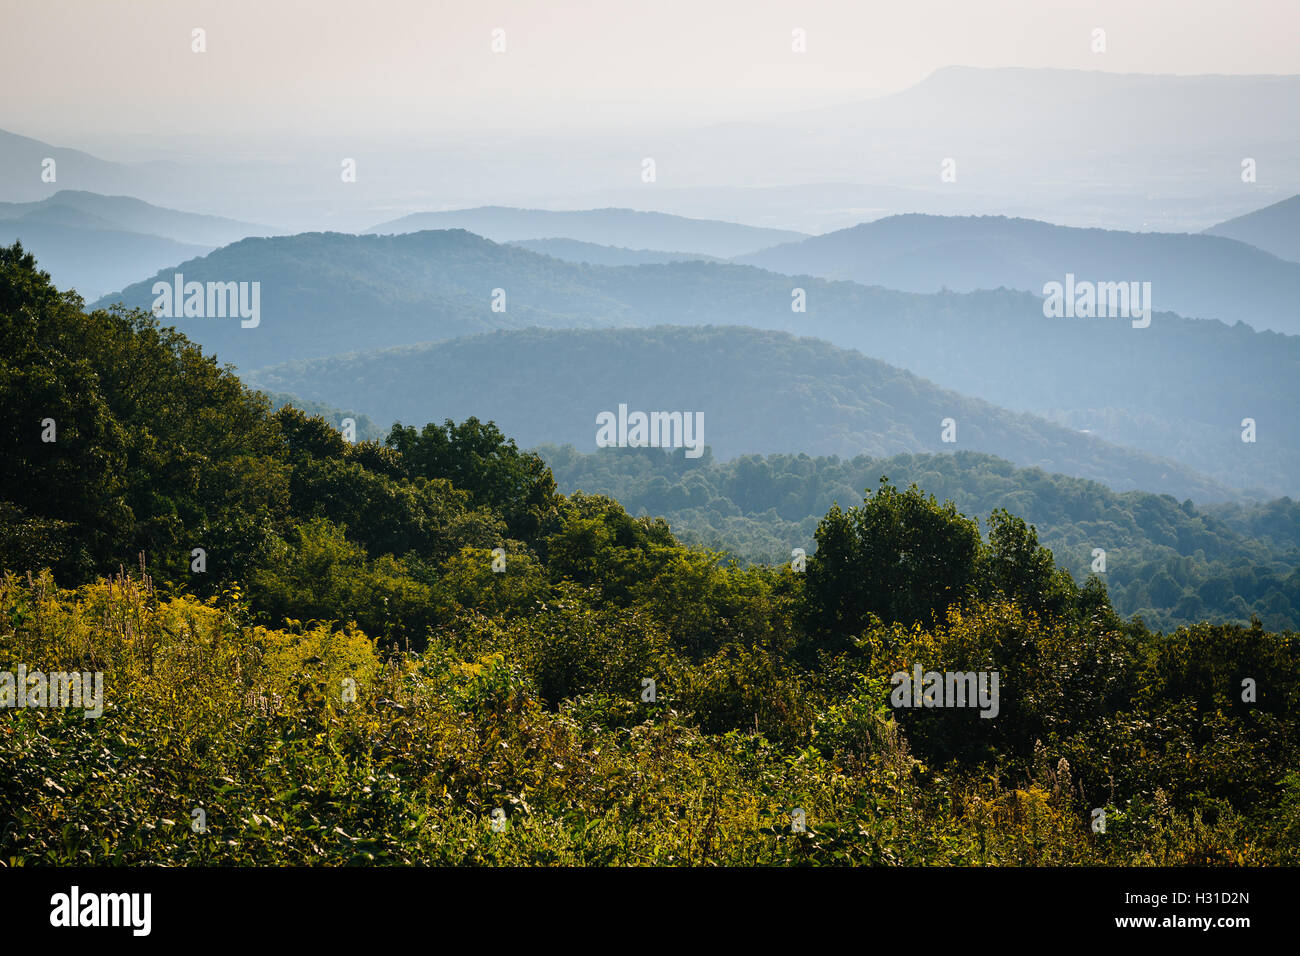 Layers of the Blue Ridge, seen from Skyline Drive, in Shenandoah National Park, Virginia. Stock Photo